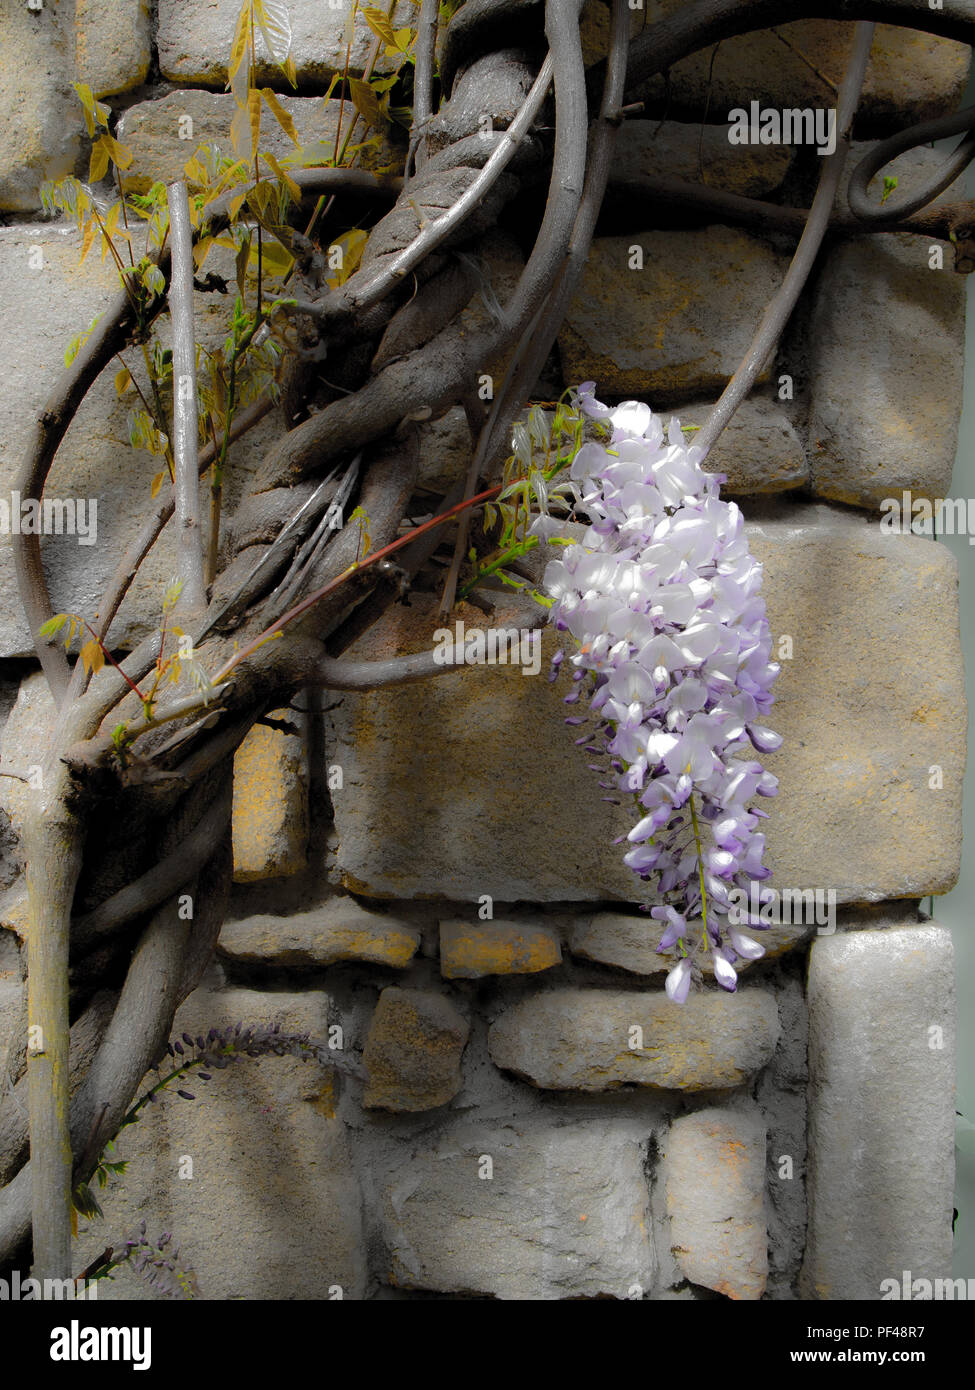 Auray, FRANCE, 27/04/2014,  Climbing Plant, Blooming, Wistia, Stone Work, Auray, The Port of Saint-Goustan, Brittany, © Peter SPURRIER, Stock Photo